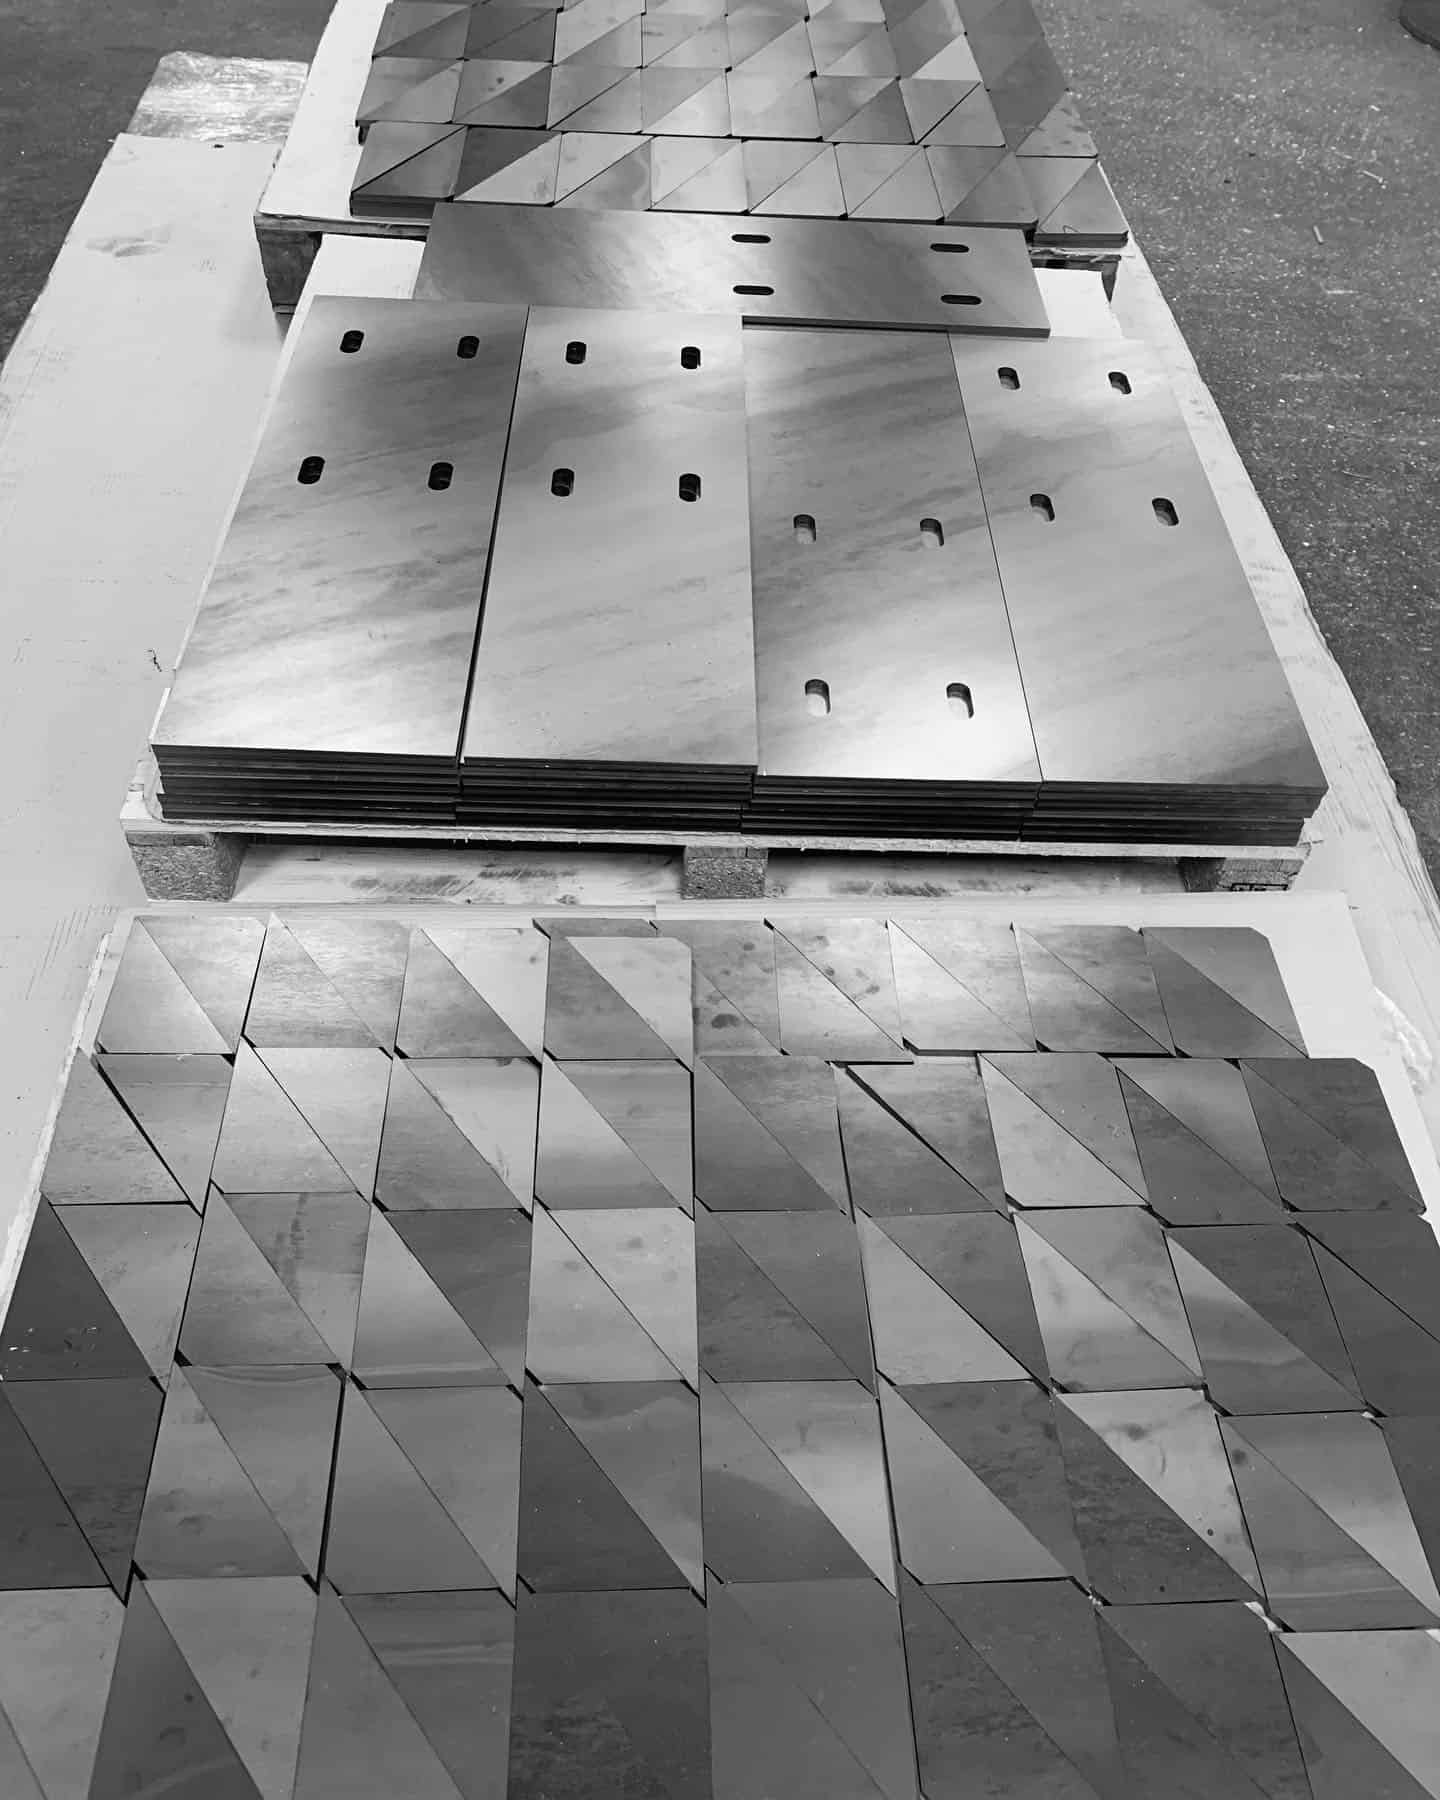 10mm S275 Steel laser cutting for the Construction Sector